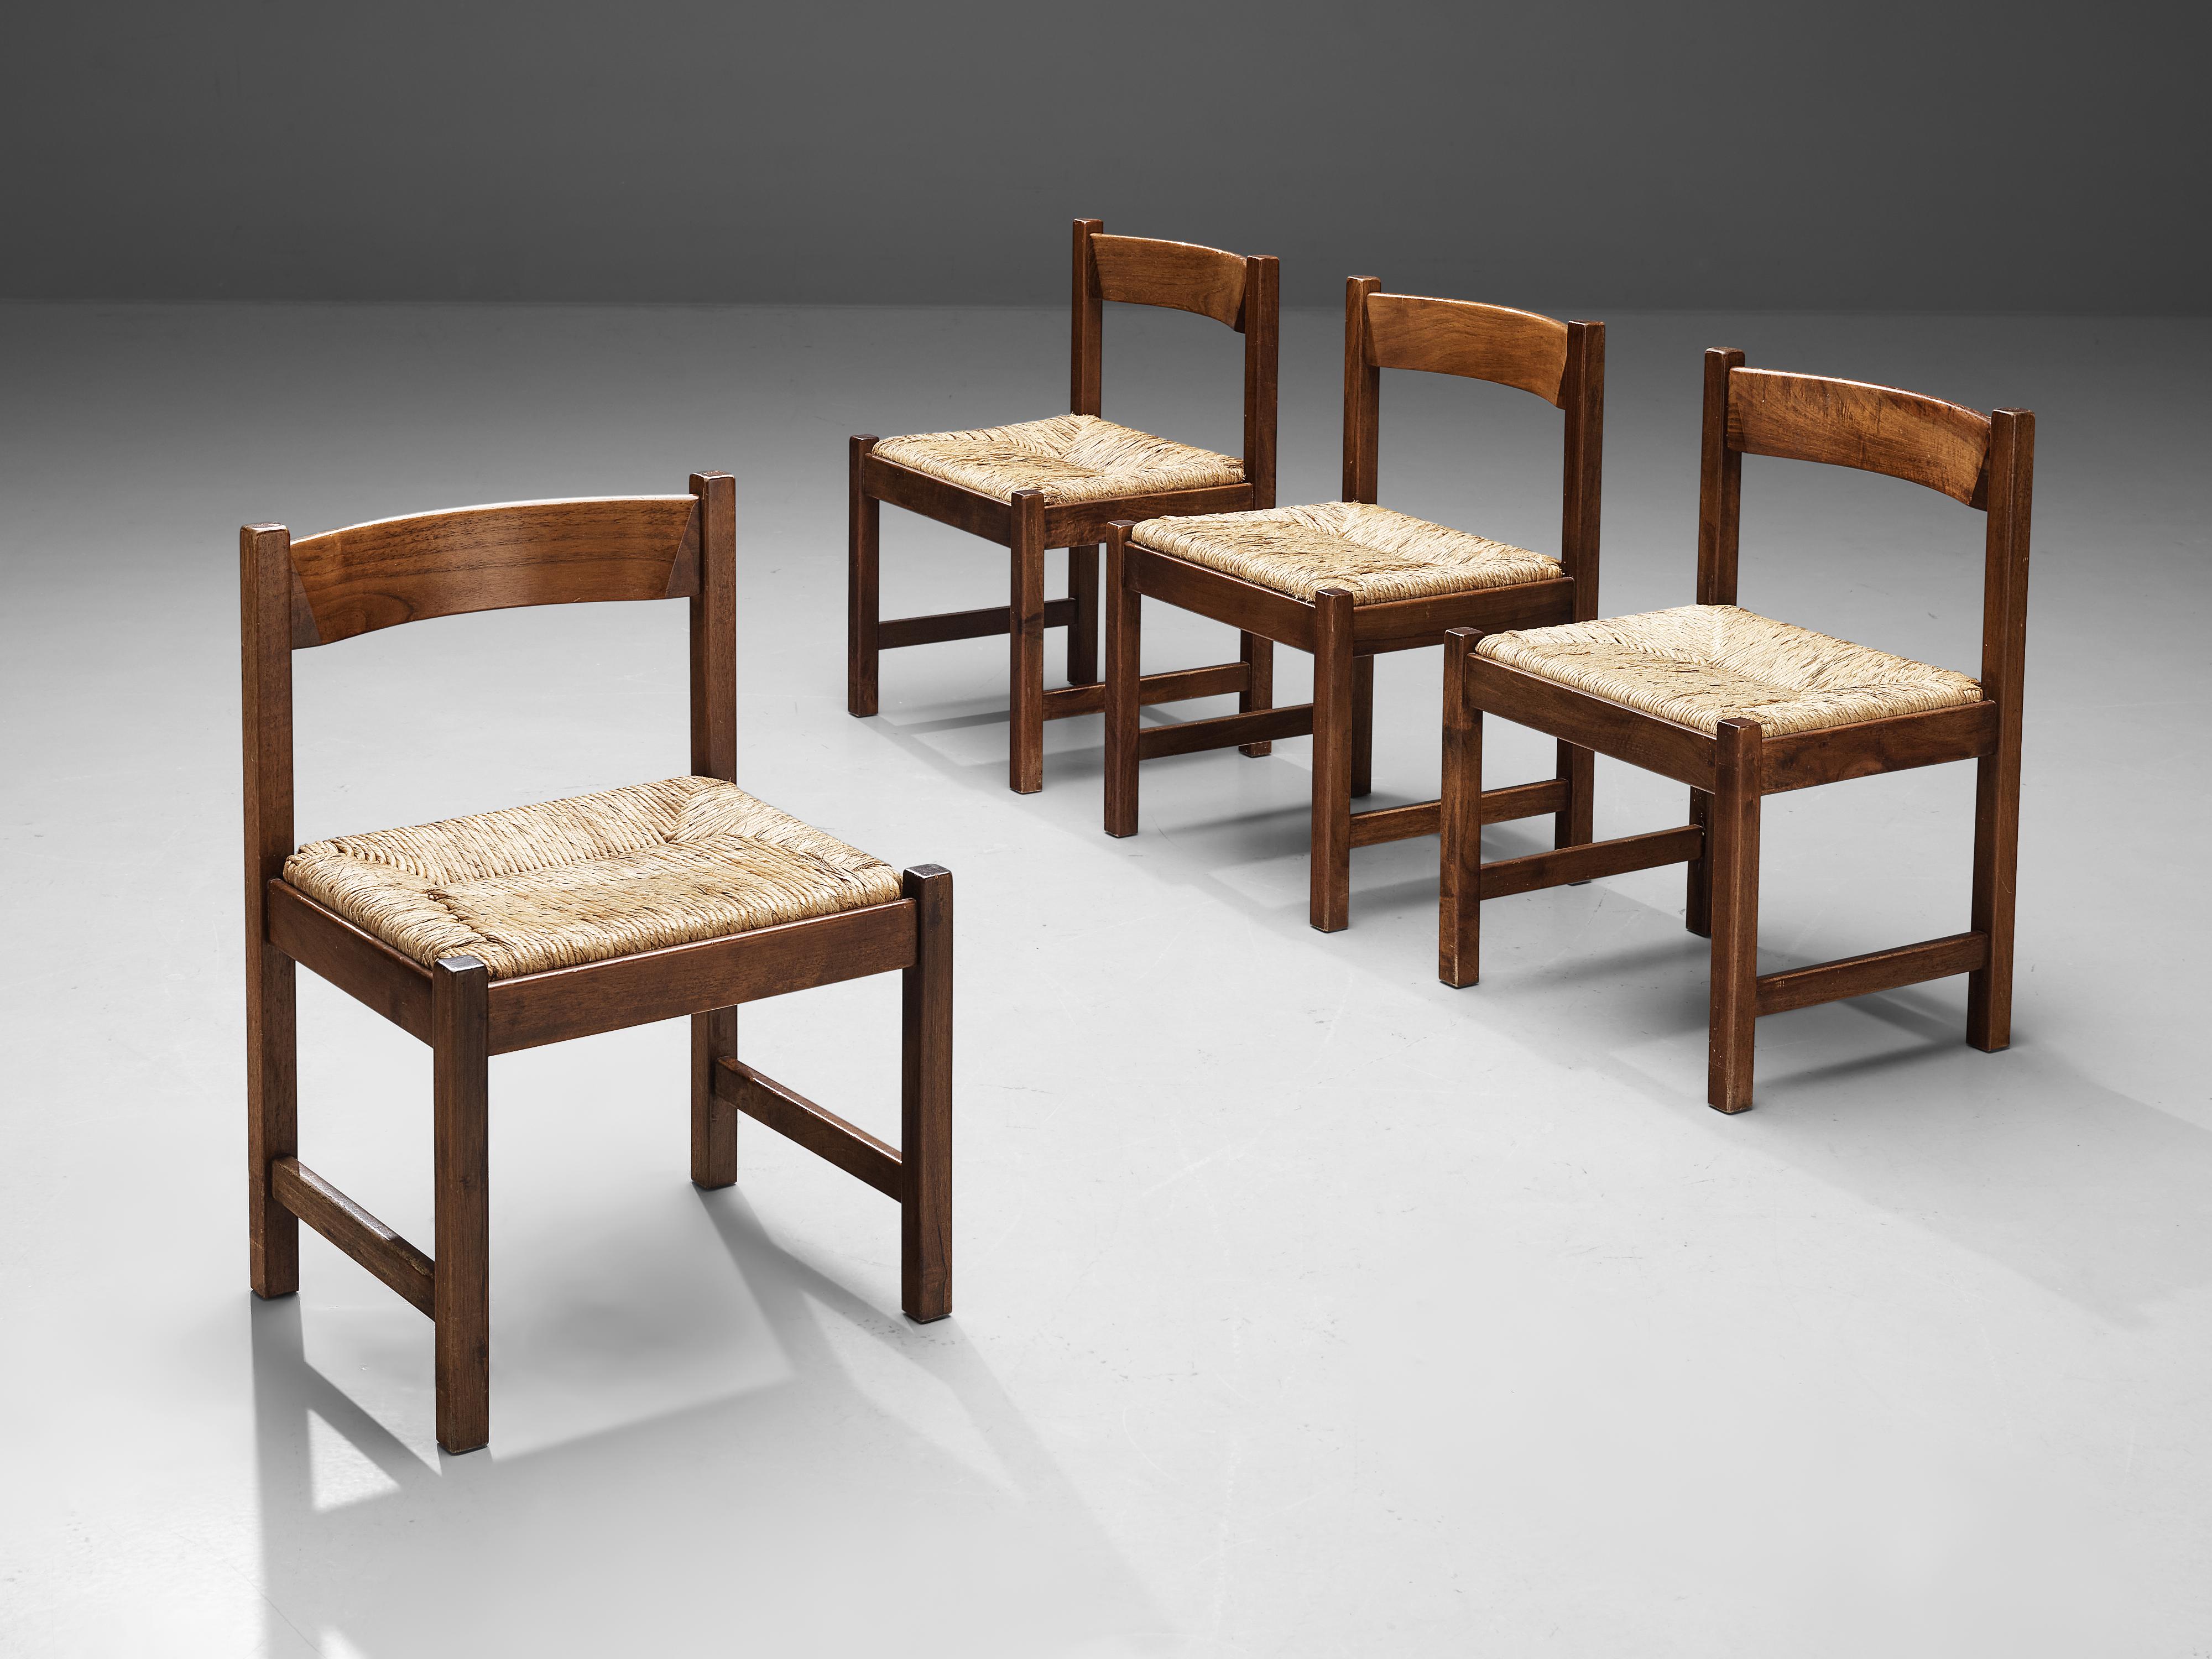 Giovanni Michelucci for Poltronova, ´Torbecchia´ dining chairs, walnut, cane, Italy, circa 1964.

This set of four dining chairs, with its solid and grand appearance, is designed by Italian designer Giovanni Michelucci (1891-1990) as part of the